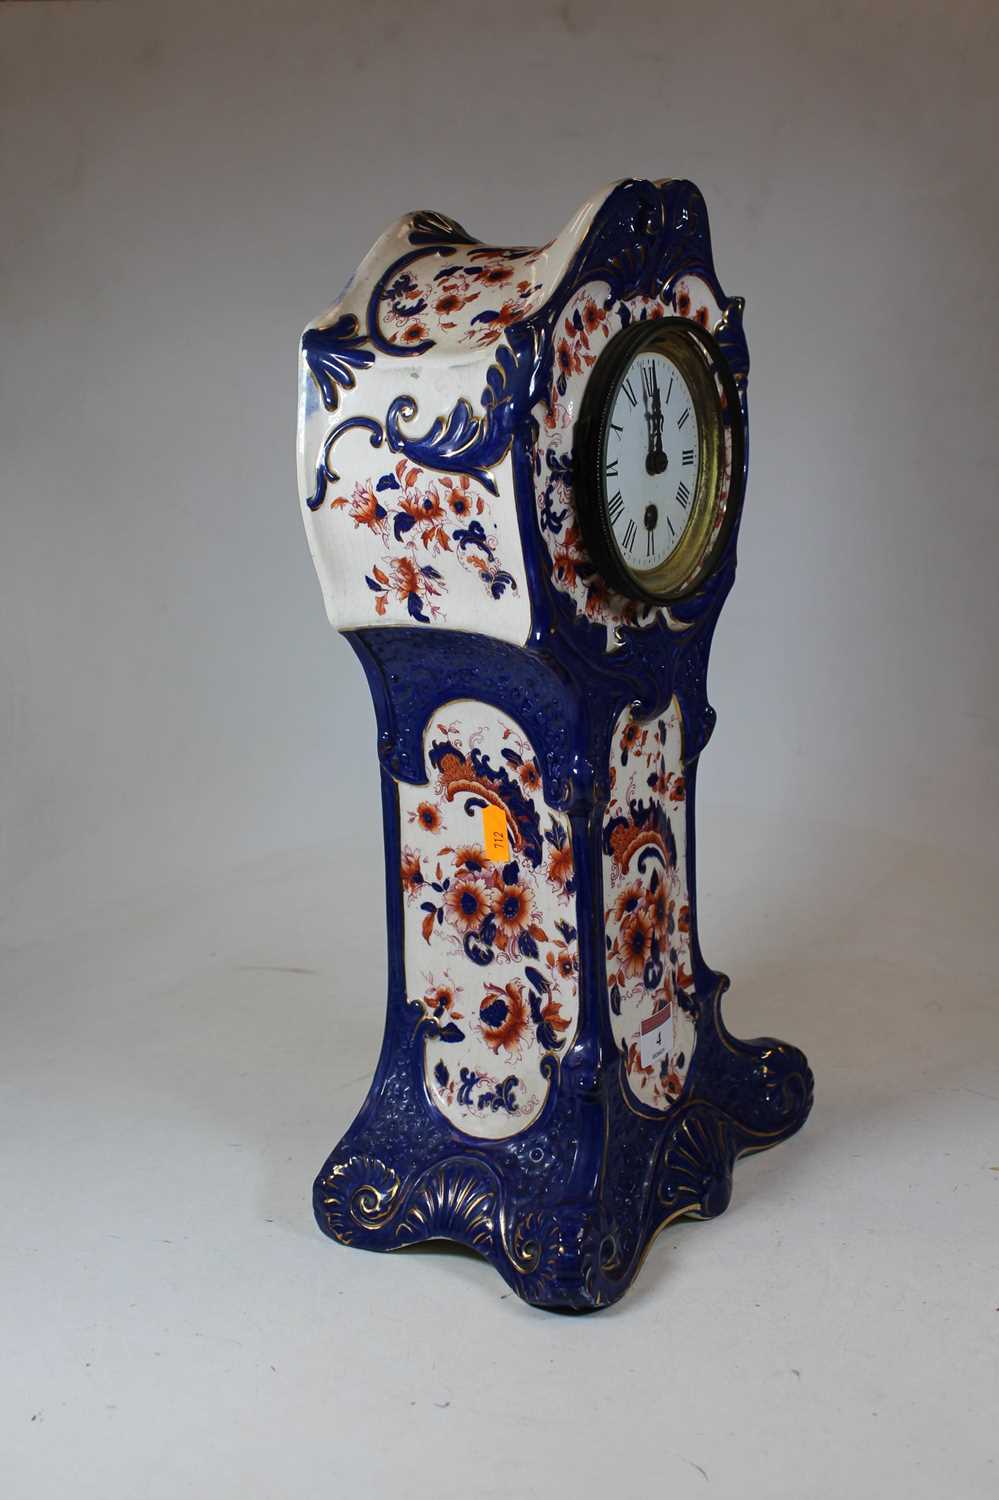 An early 20th century S Fielding & Co porcelain cased mantel clock, decorated in shades of cobalt - Image 3 of 9